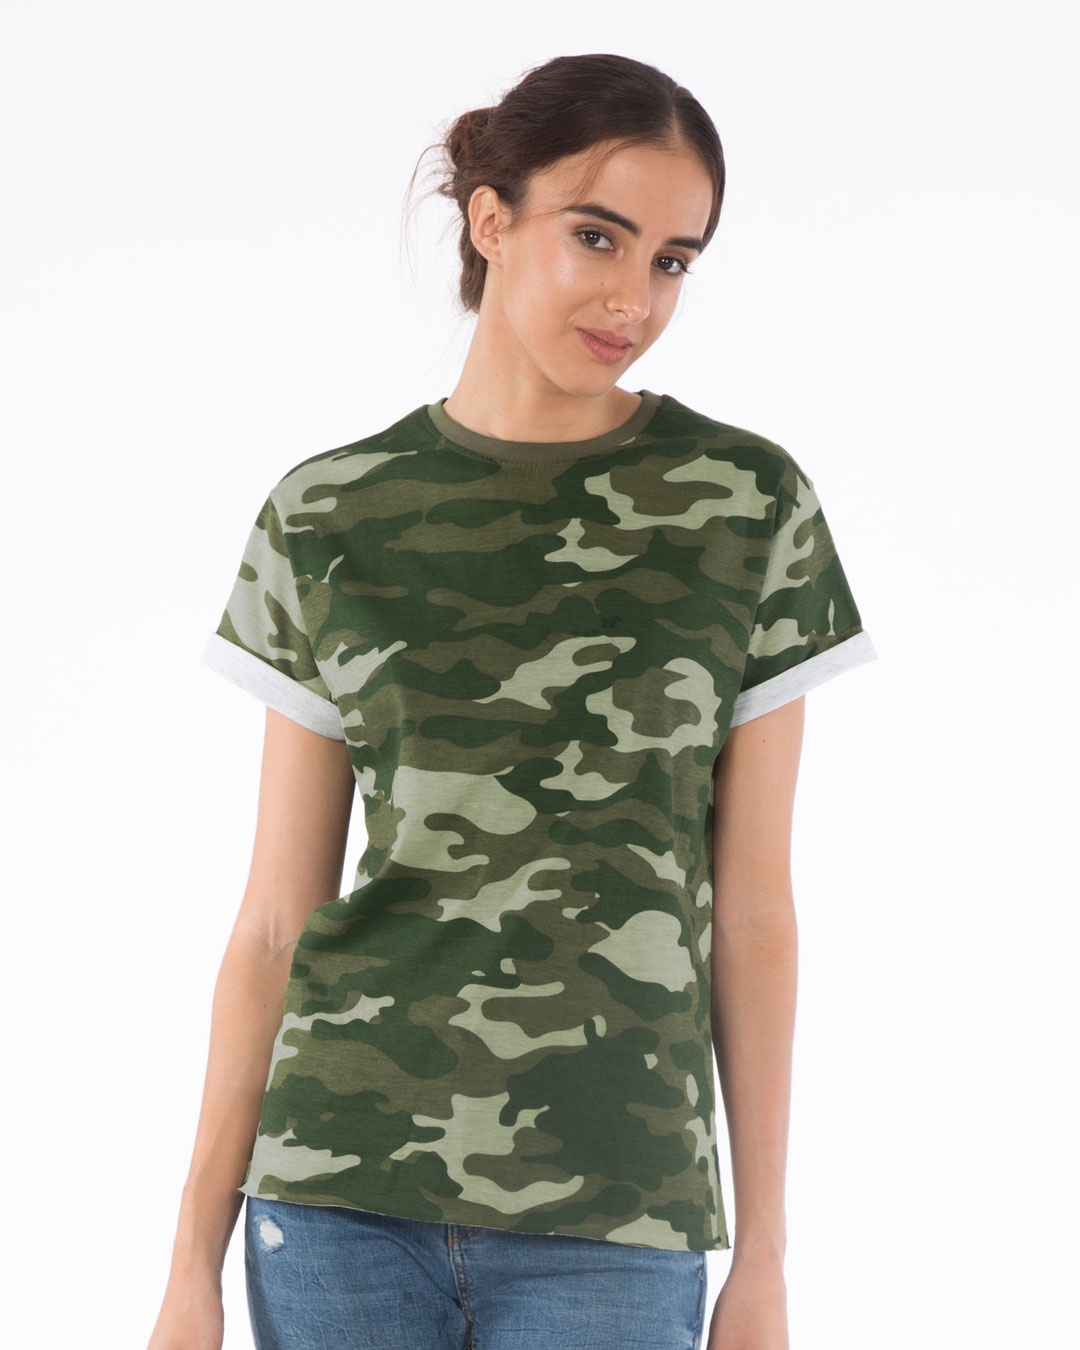 Buy Camouflage Army Print t shirt for Women Online @ ₹350 from ShopClues